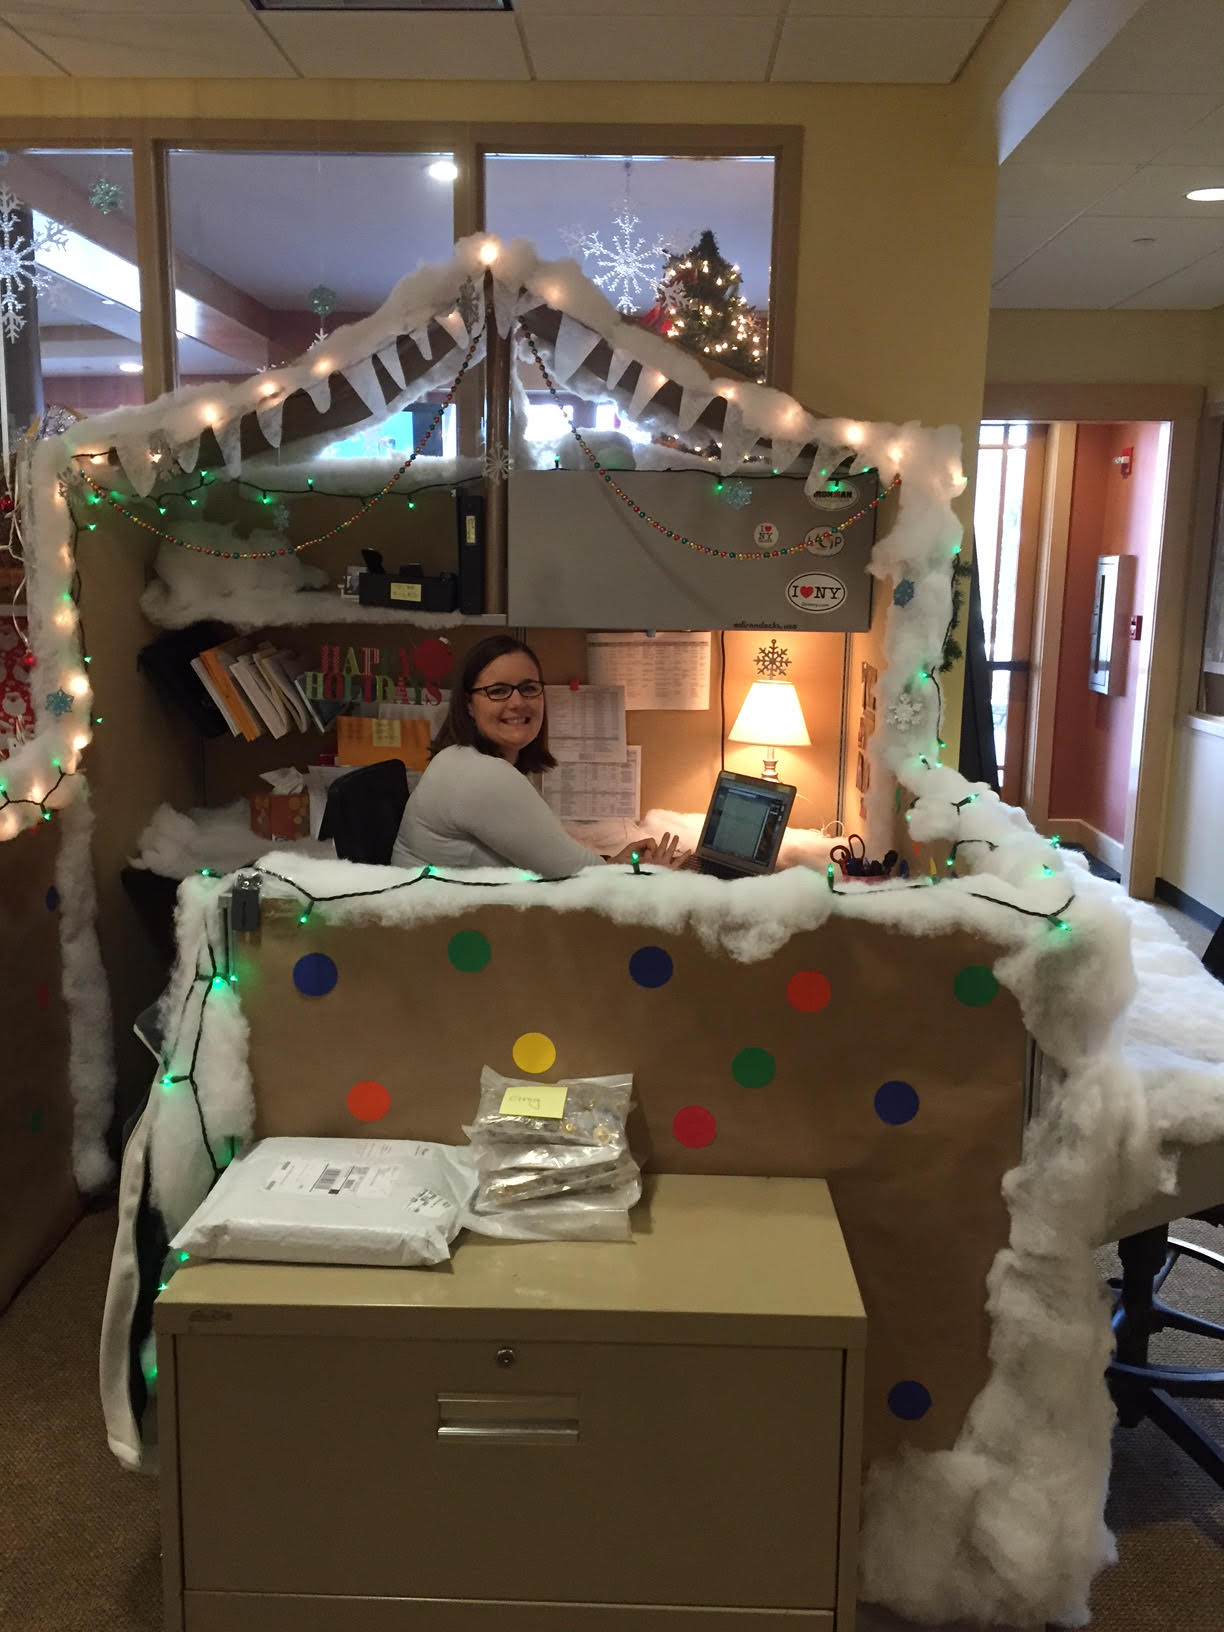 ROOST announces winners of cubicle decorating contest - Regional Office